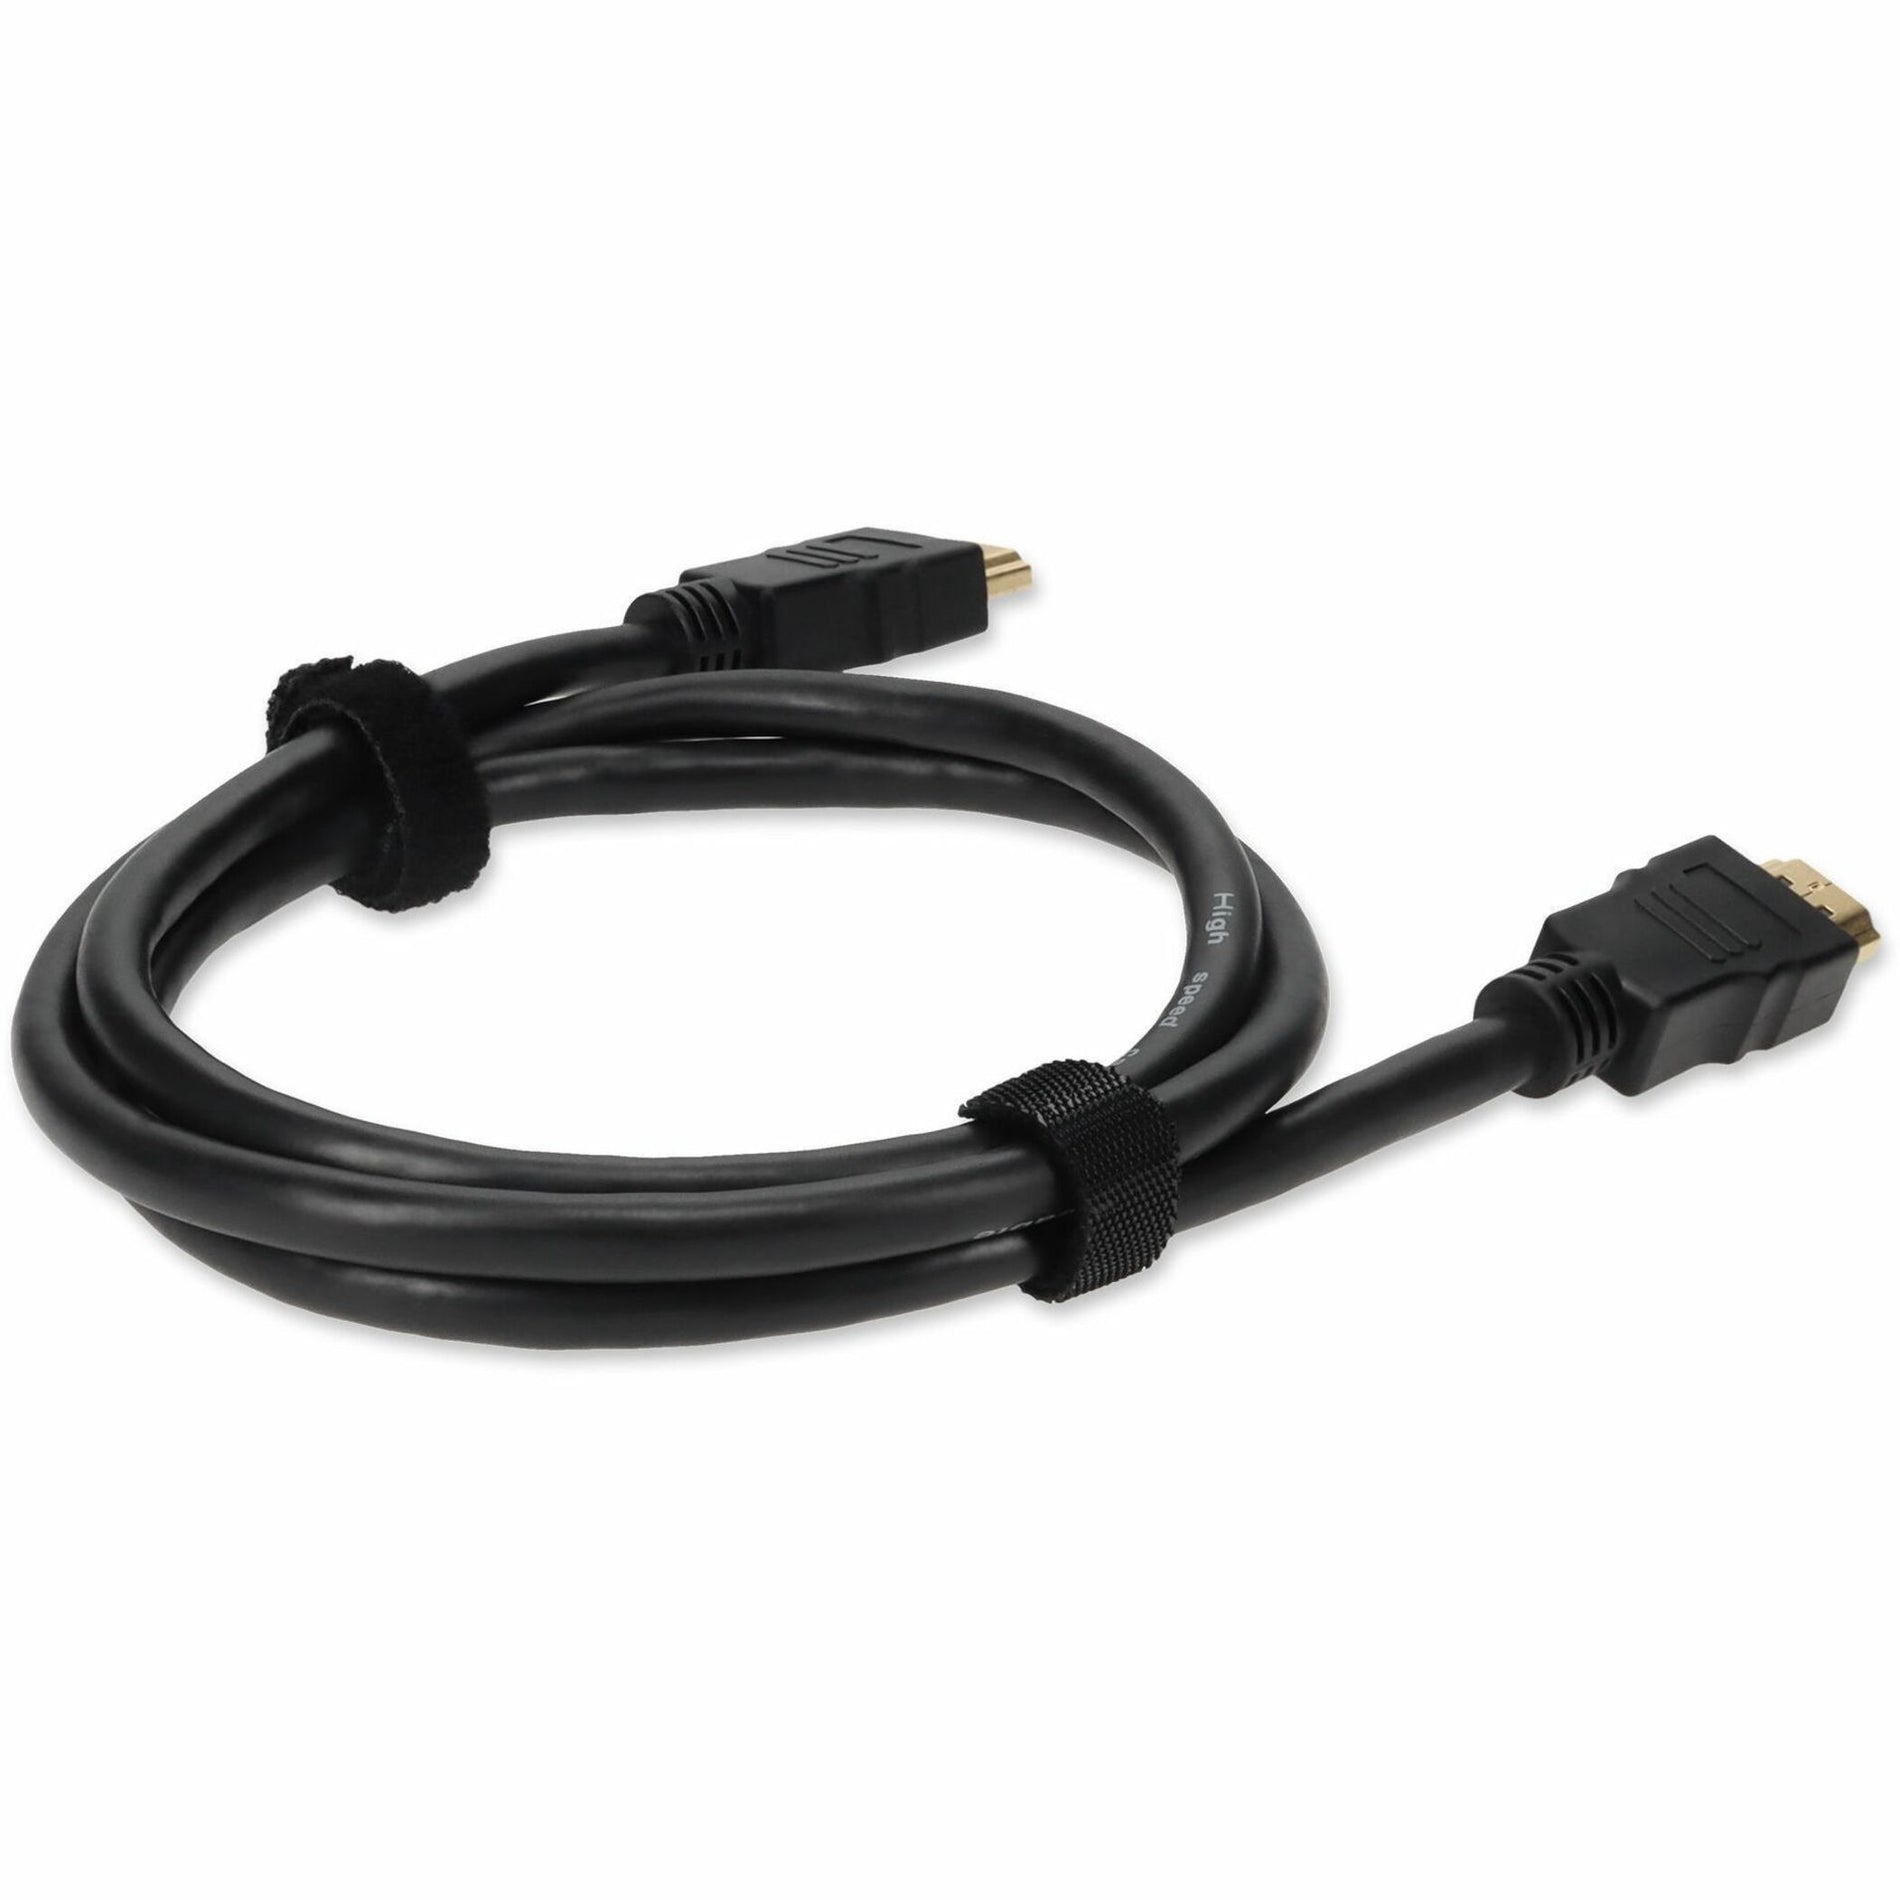 AddOn HDMI2HDMI15F-5PK Bulk 5 Pack 15ft (4.6M) HDMI to HDMI 1.3 Cable - Male to Male, 1080P, 3 Year Warranty